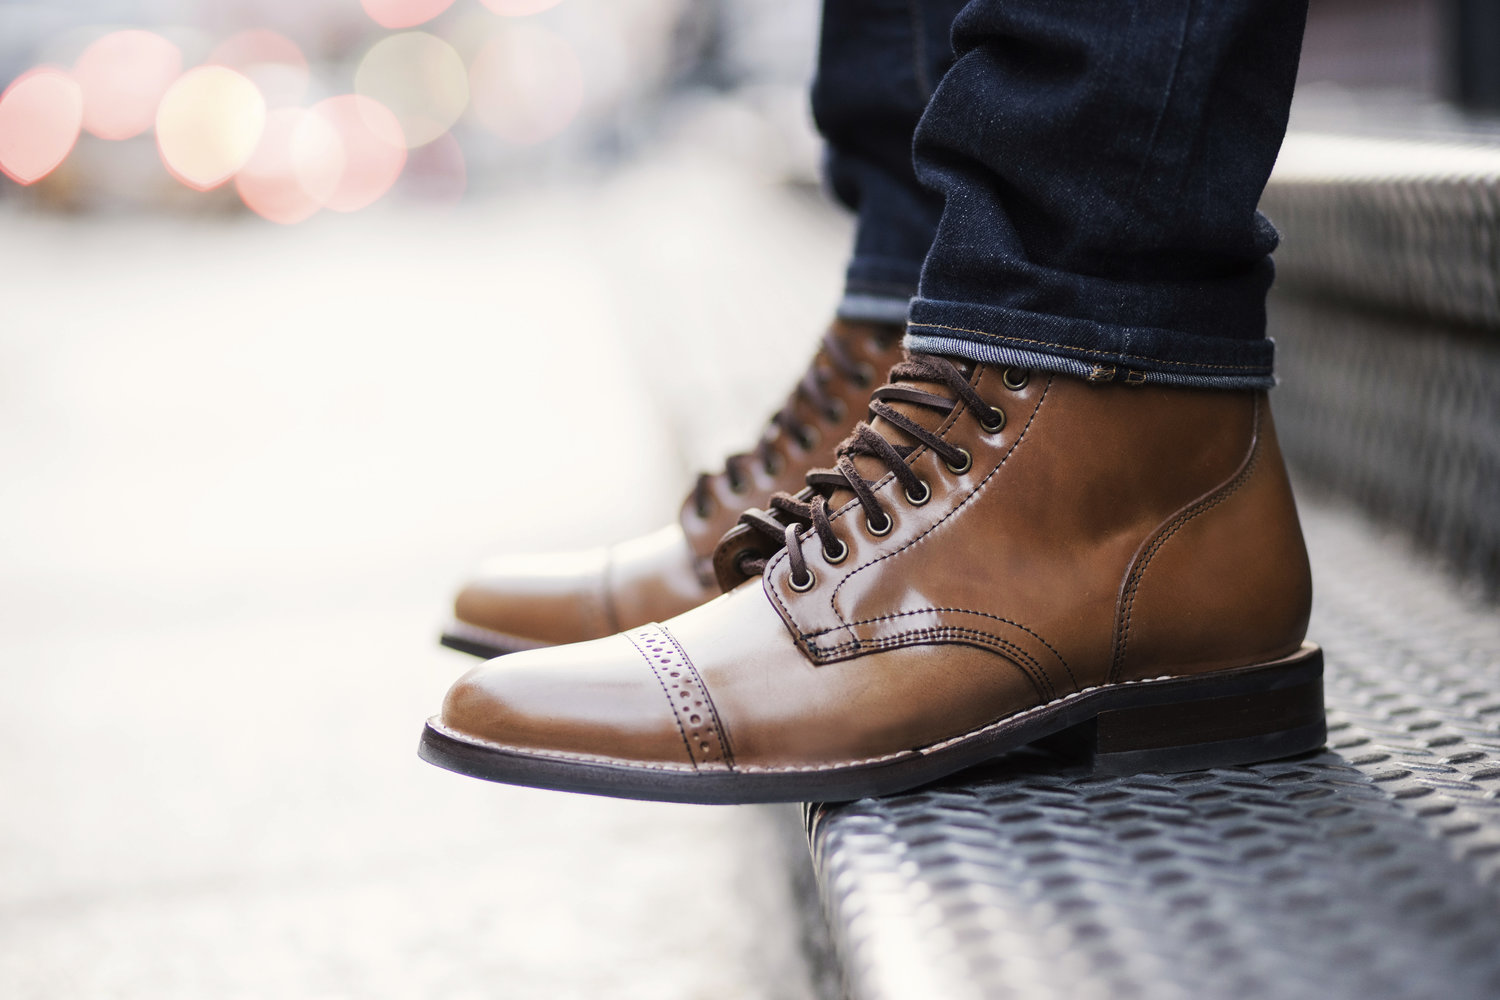 Thursday Boots Debuts New Line Of Premium Leather Footwear - The Manual